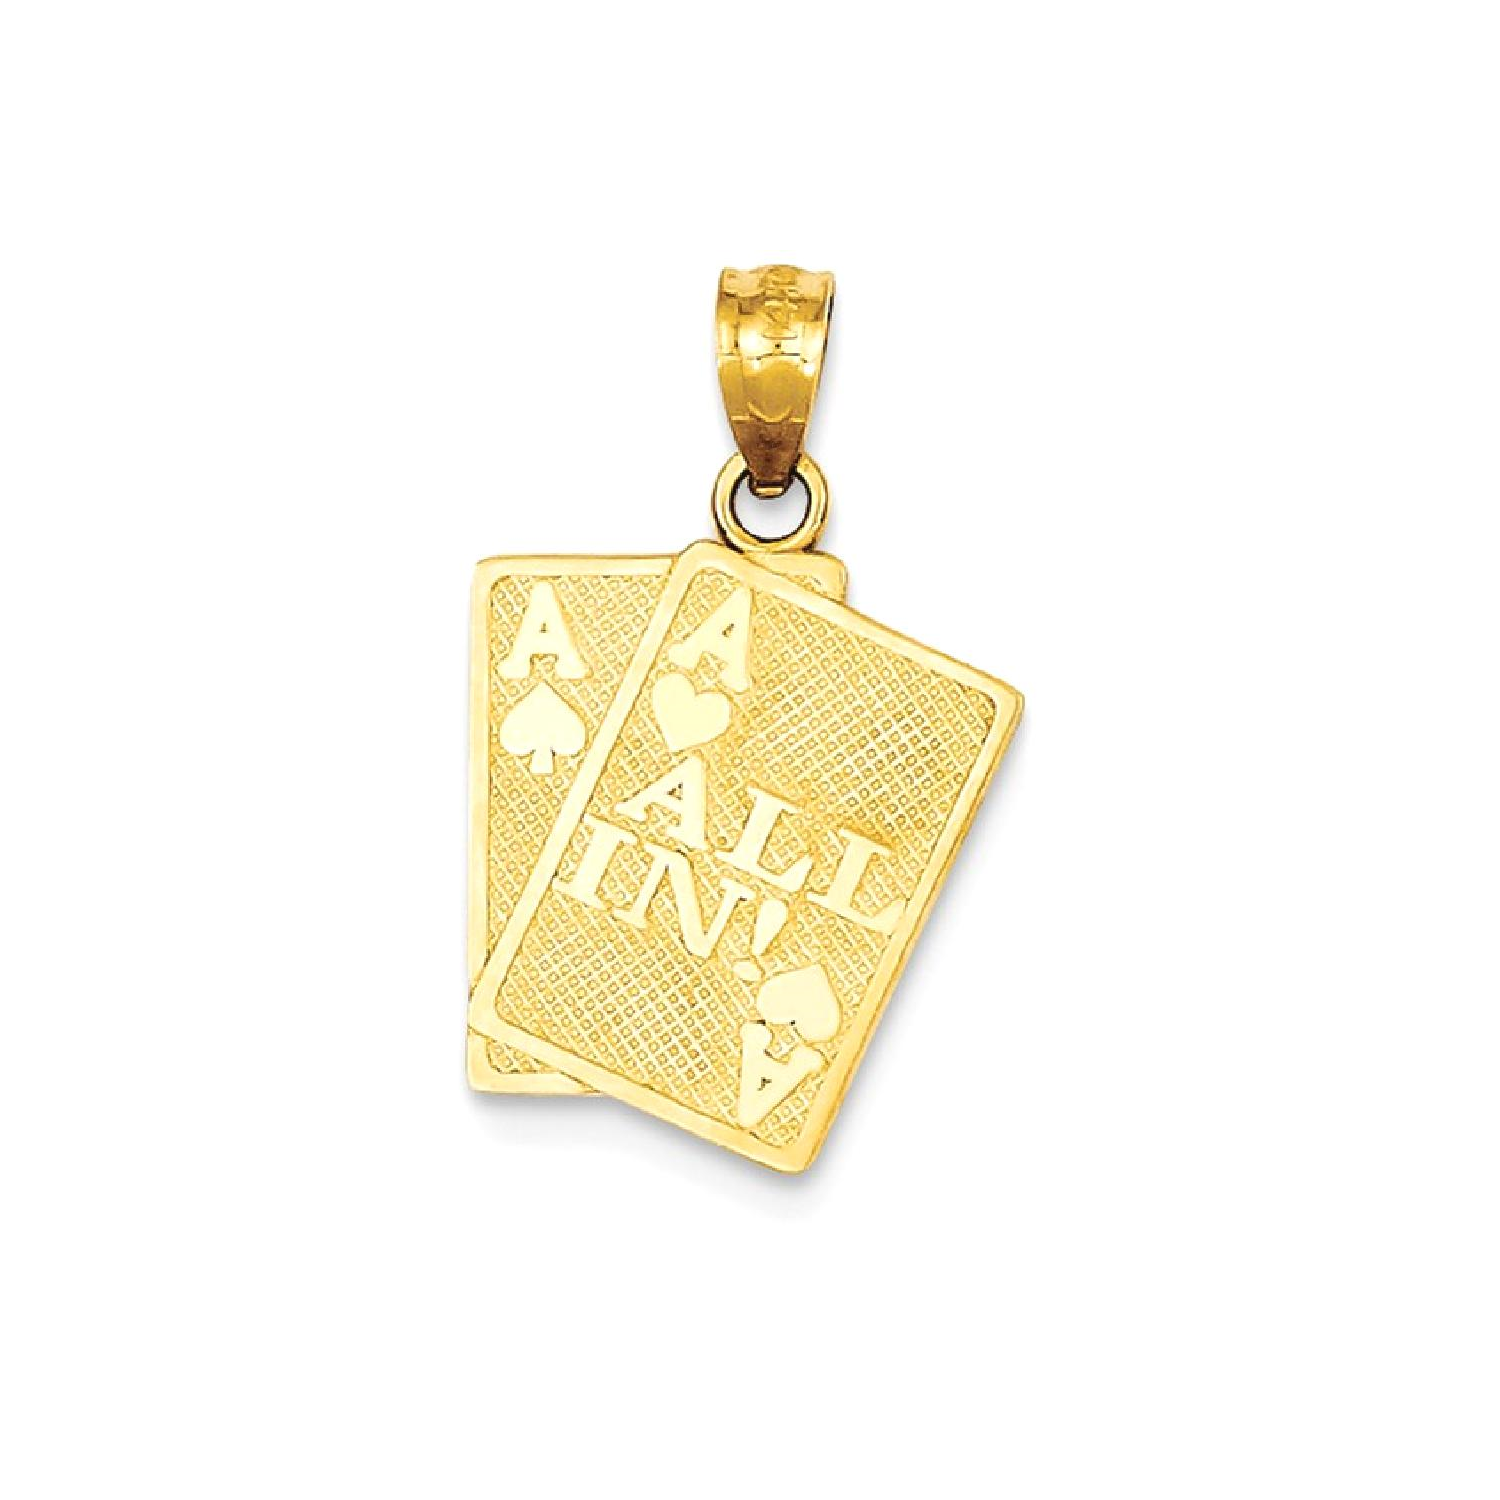 IceCarats 14k Yellow Gold Ace Of Hearts Spade All In! Cards Pendant Charm Necklace Good Luck Italian Horn